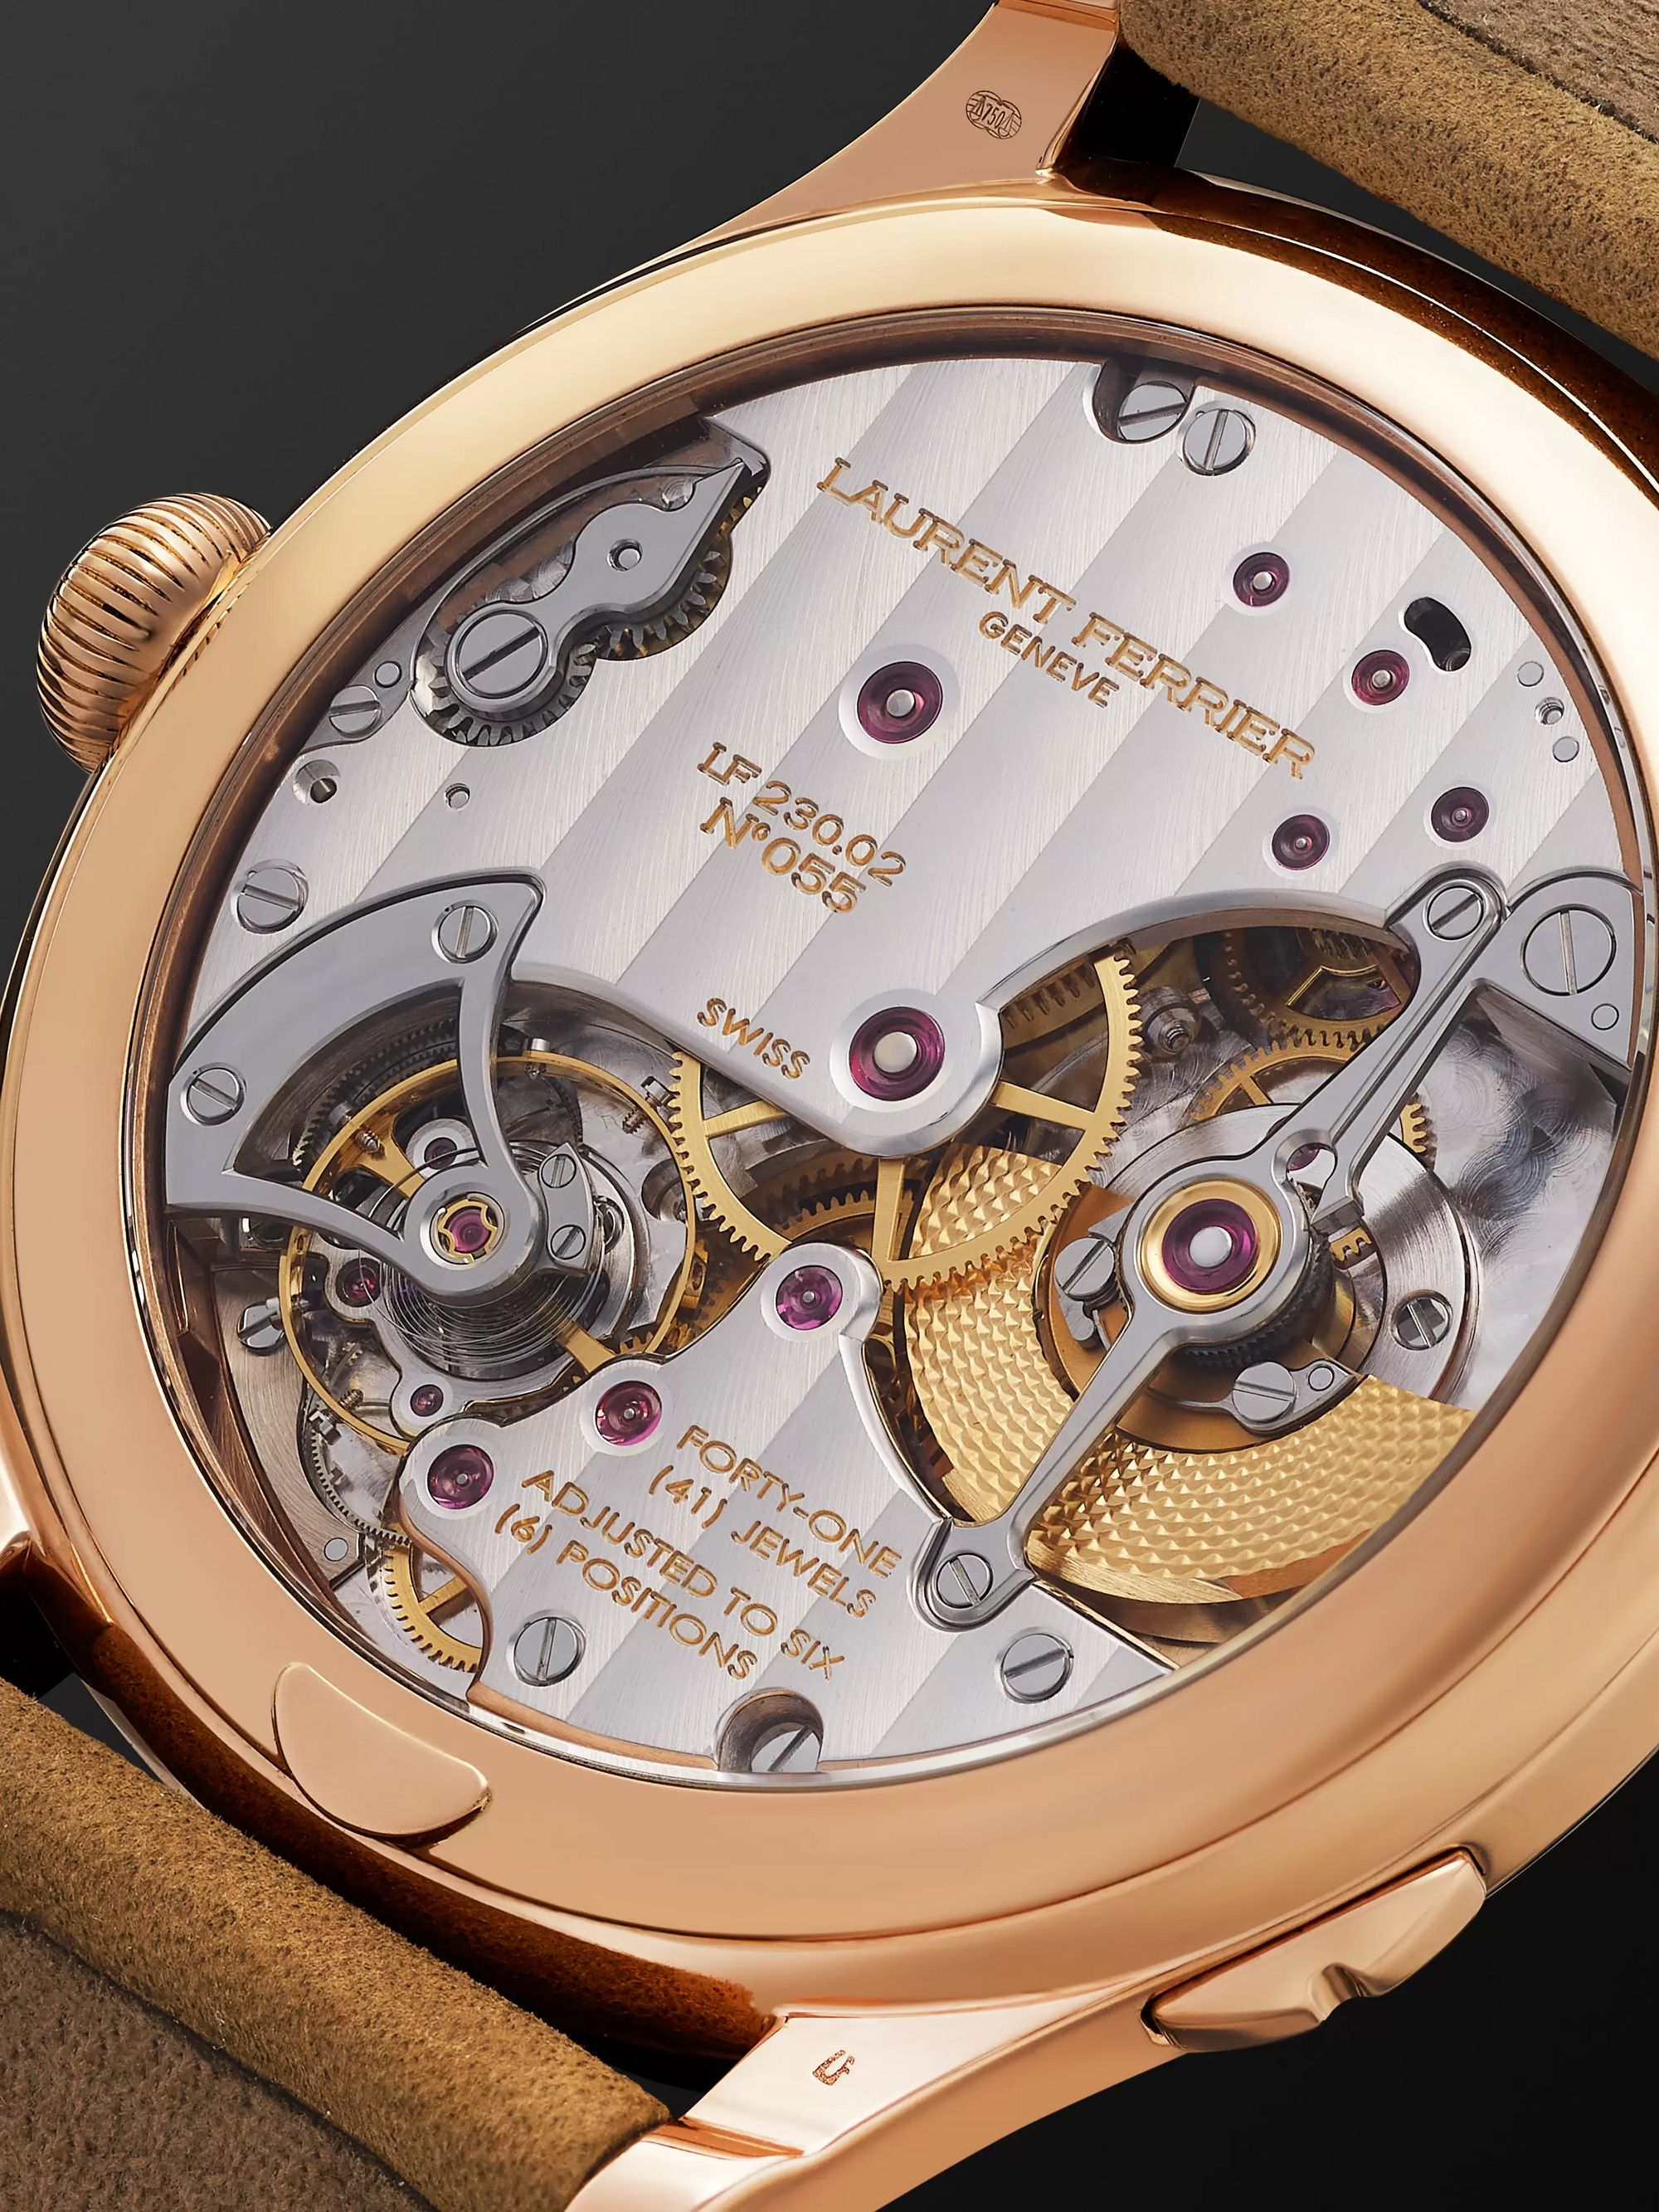 Laurent Ferrier Traveller Automatic 41mm 18-Karat Red Gold and Leather Watch, Ref. No. LCF007.R5.AR1.1